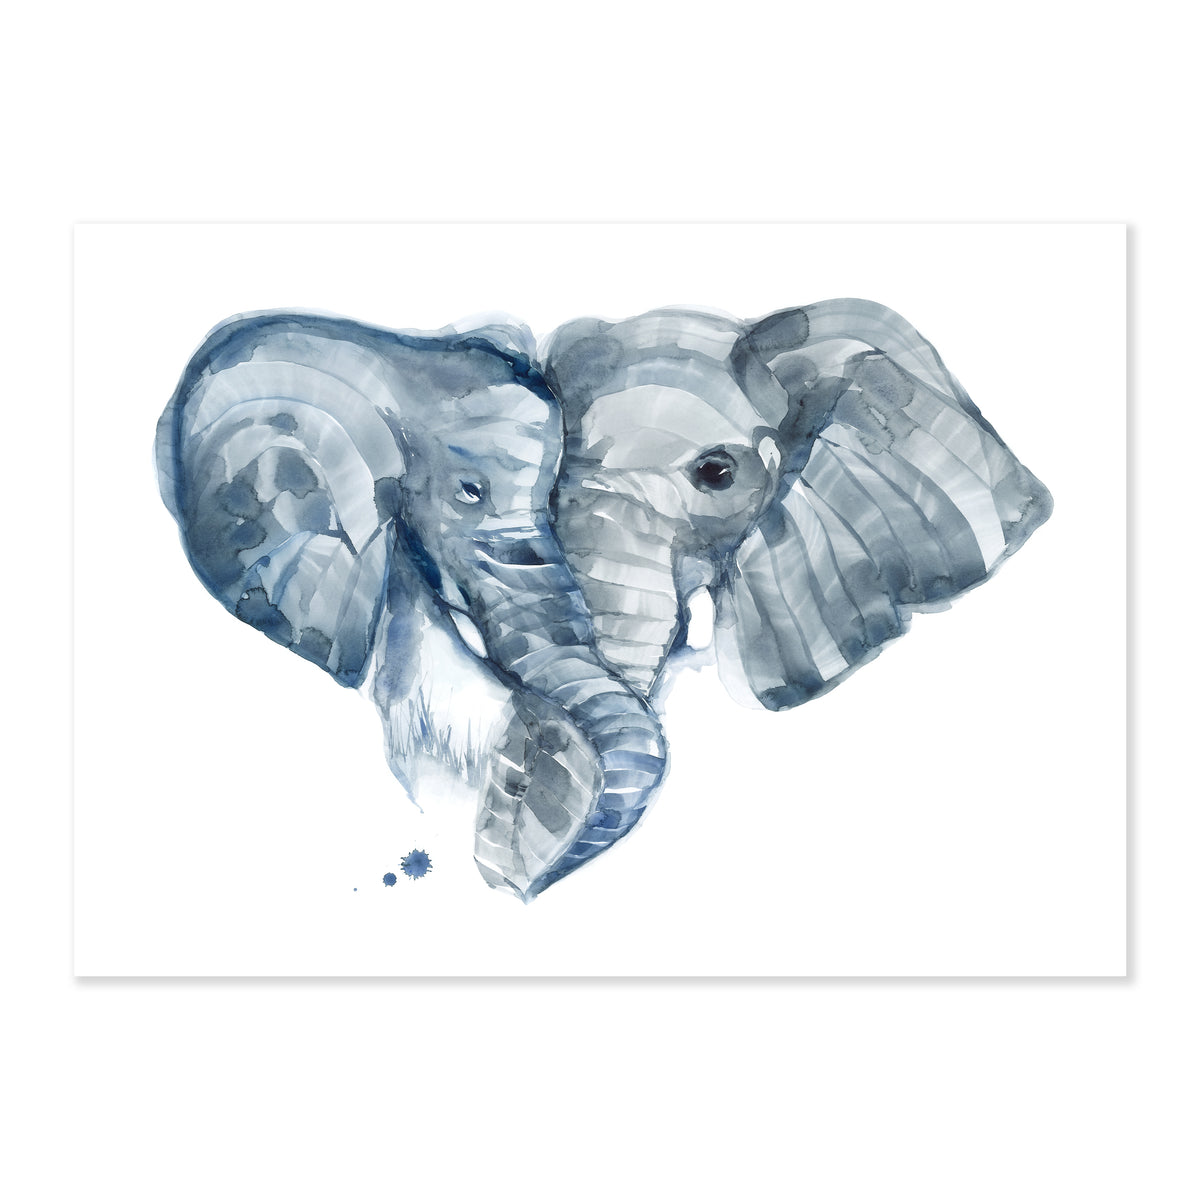 A fine art print illustrating a pair of grey elephants interlocking their trunks painted with watercolors on a soft white background